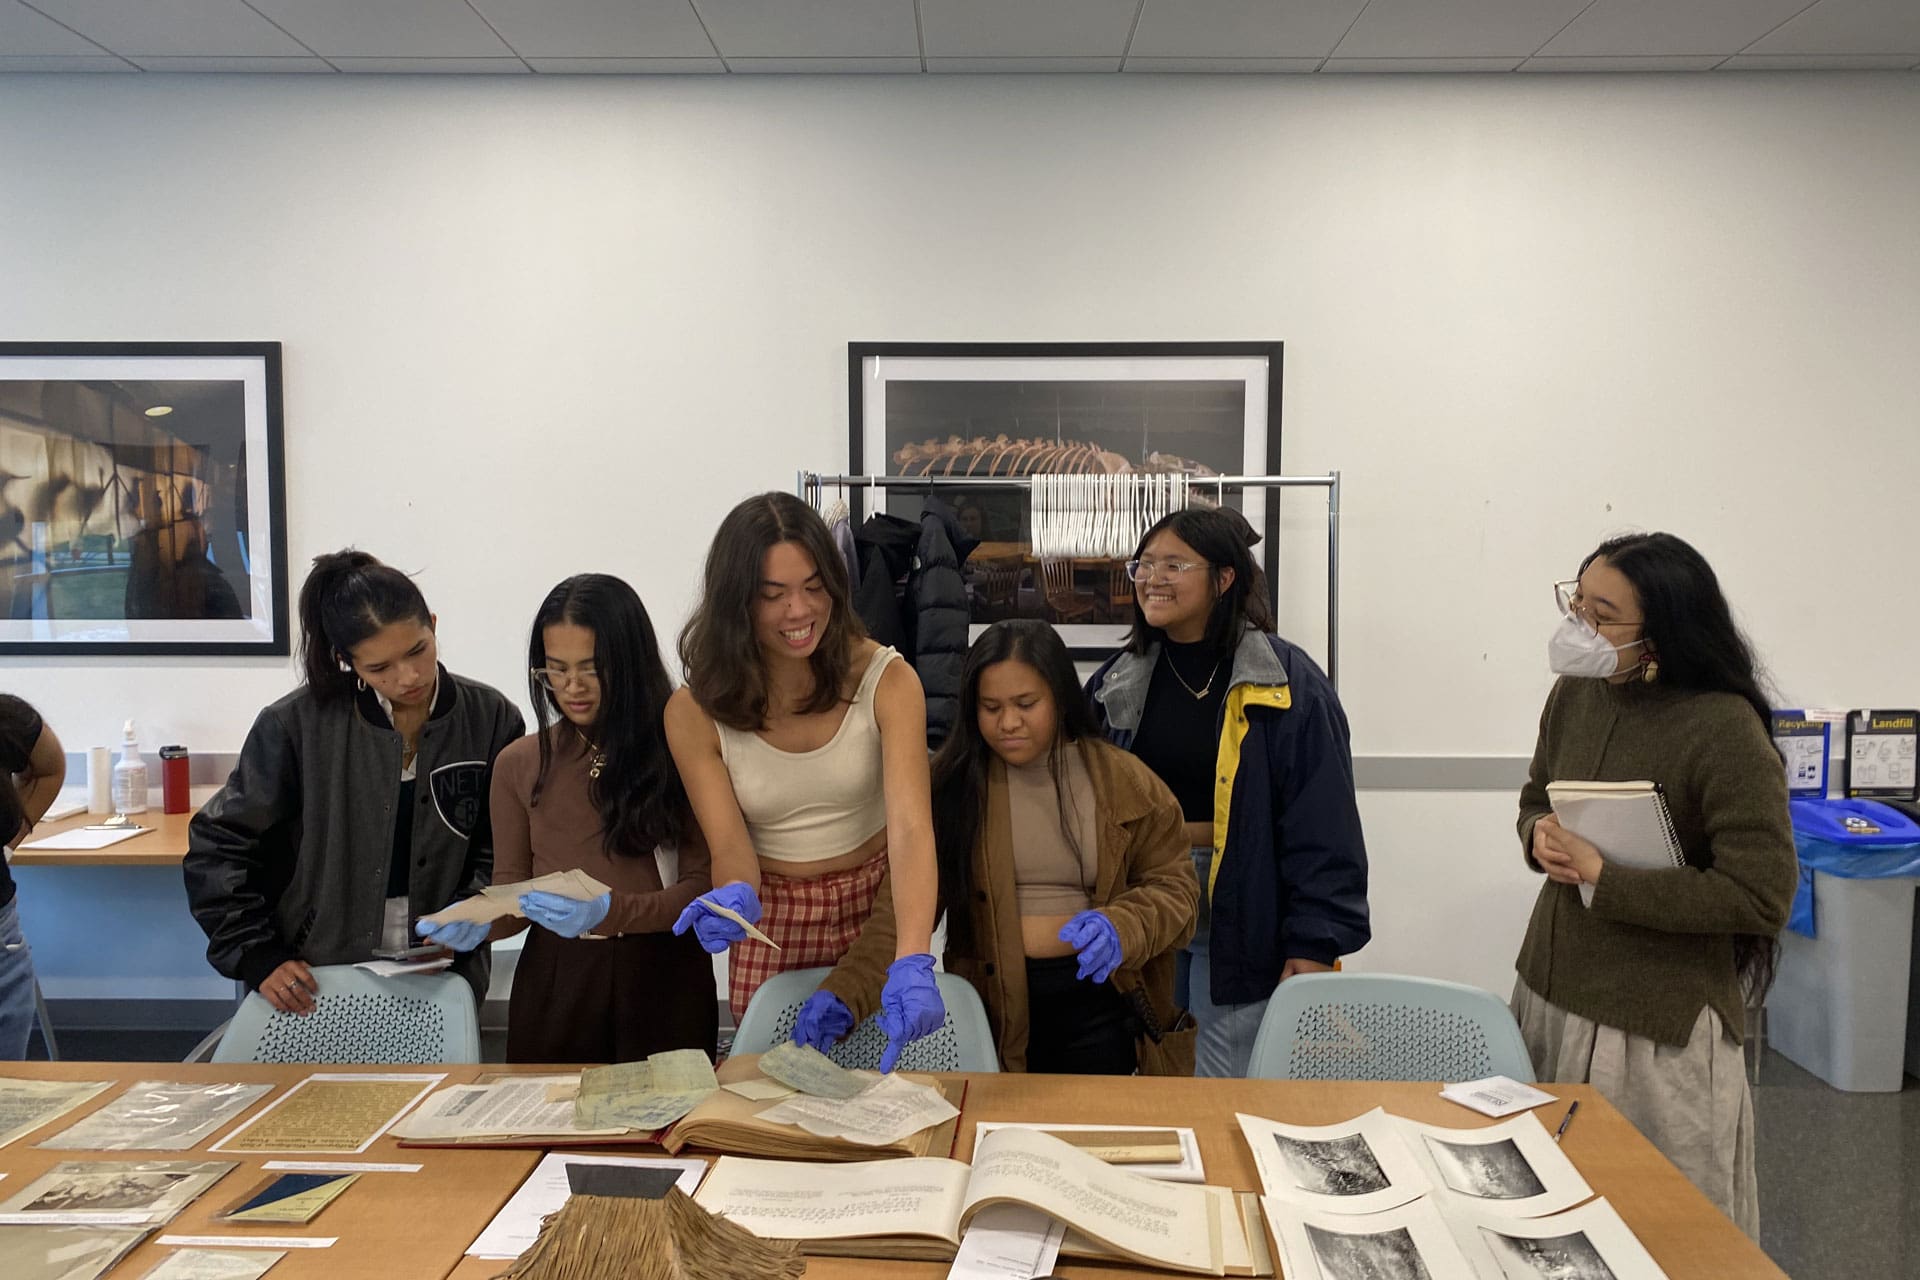 A group of students looking at various archival materials.